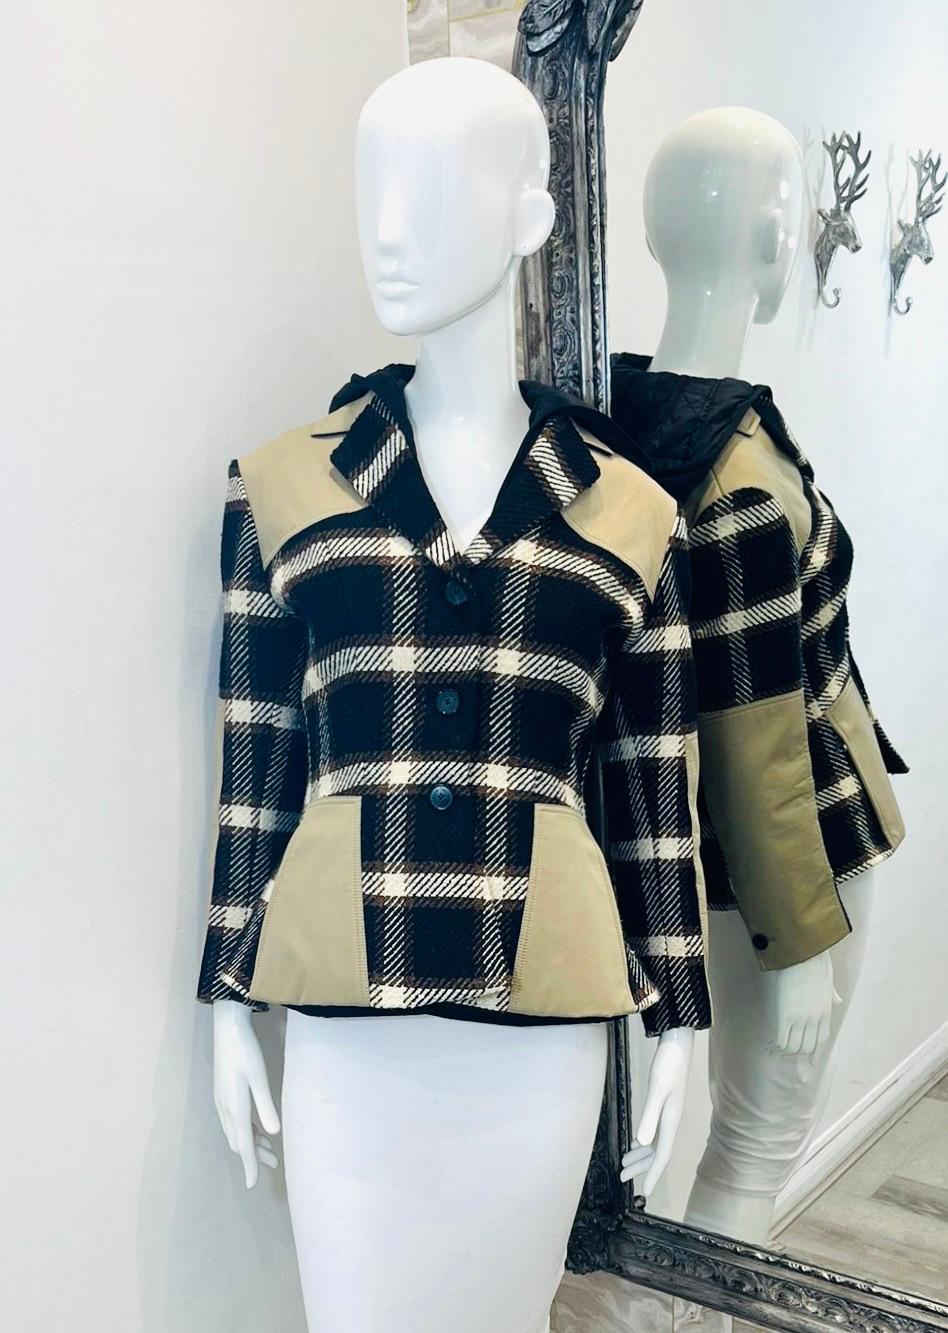 Christian Dior Silk & Wool Plaid Check Hooded Coat

From 2022/23 AW collection - Black coat designed with white and orange detailed plaid check.

Styled with trench coat inspired, beige inserts to the shoulders, pockets and front.

Featuring black